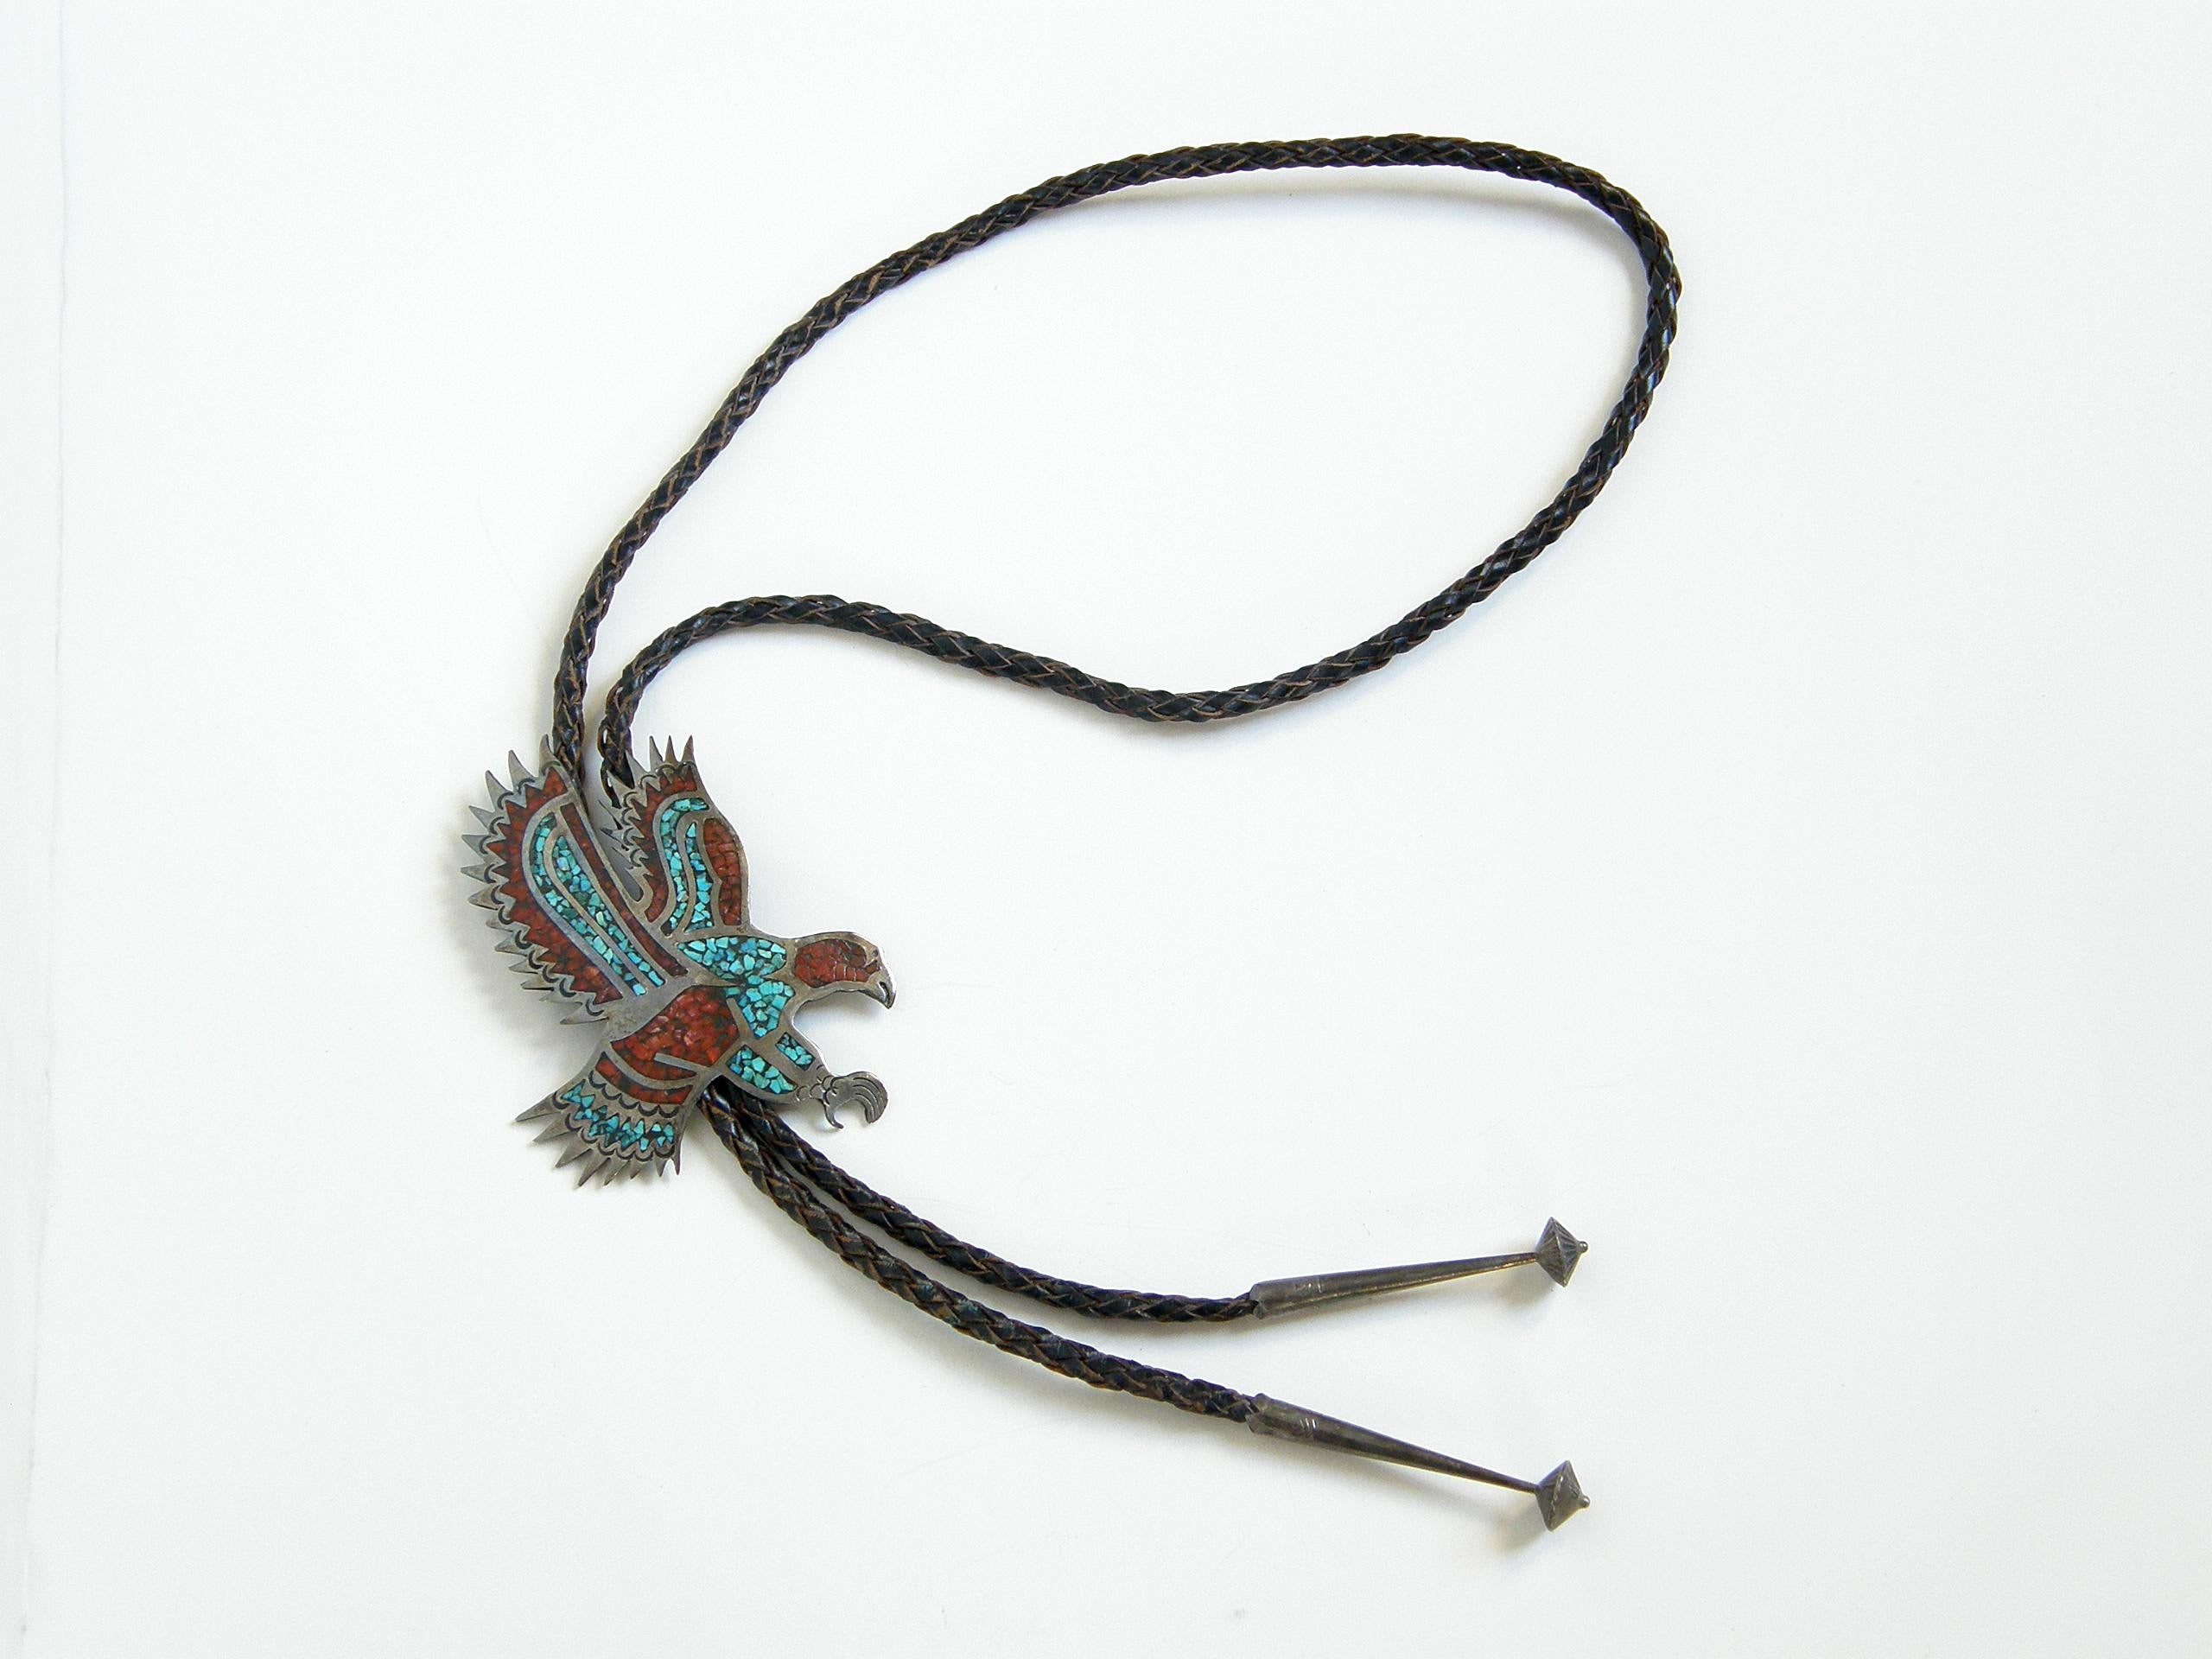 This circa 1970s, handmade bolo tie features a dramatic,  sterling eagle in flight. The silver has turquoise and coral chip inlay that enhances the design. The braided leather cord ends with decorative, sterling tips, and there is a locking slide on